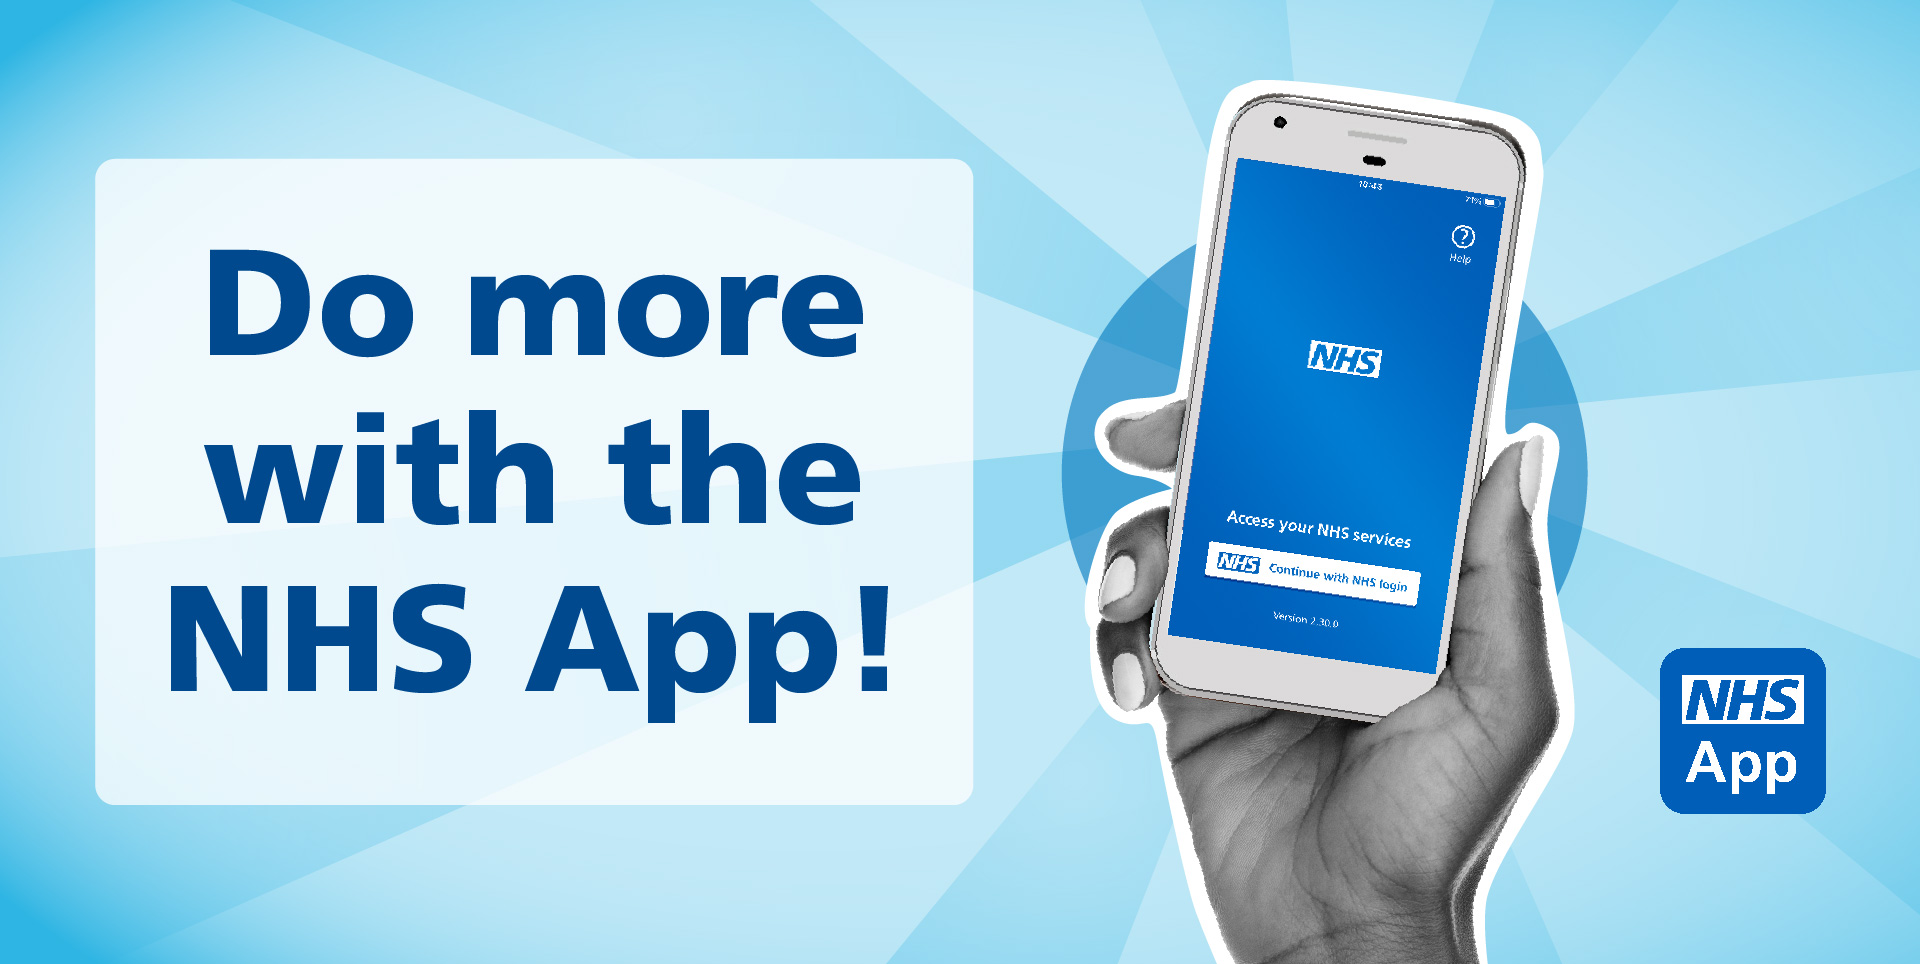 Image shows a mobile phone showing the NHS app with text saying Do more with the NHS app